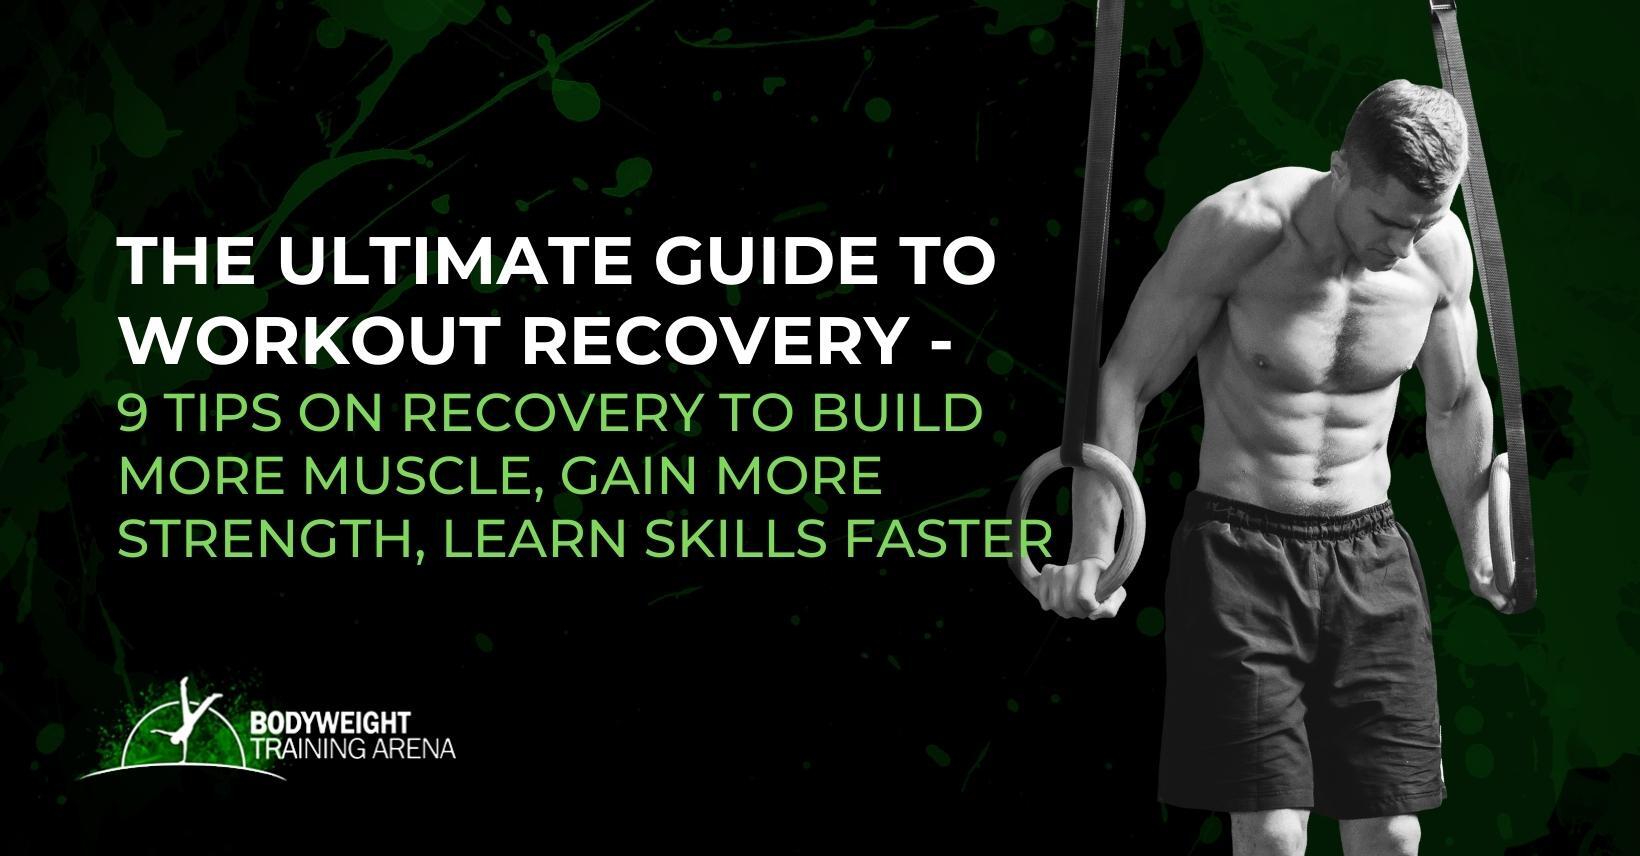 The Ultimate Guide to Workout Recovery – 14 tips to build more muscle, gain more strength, learn skills faster